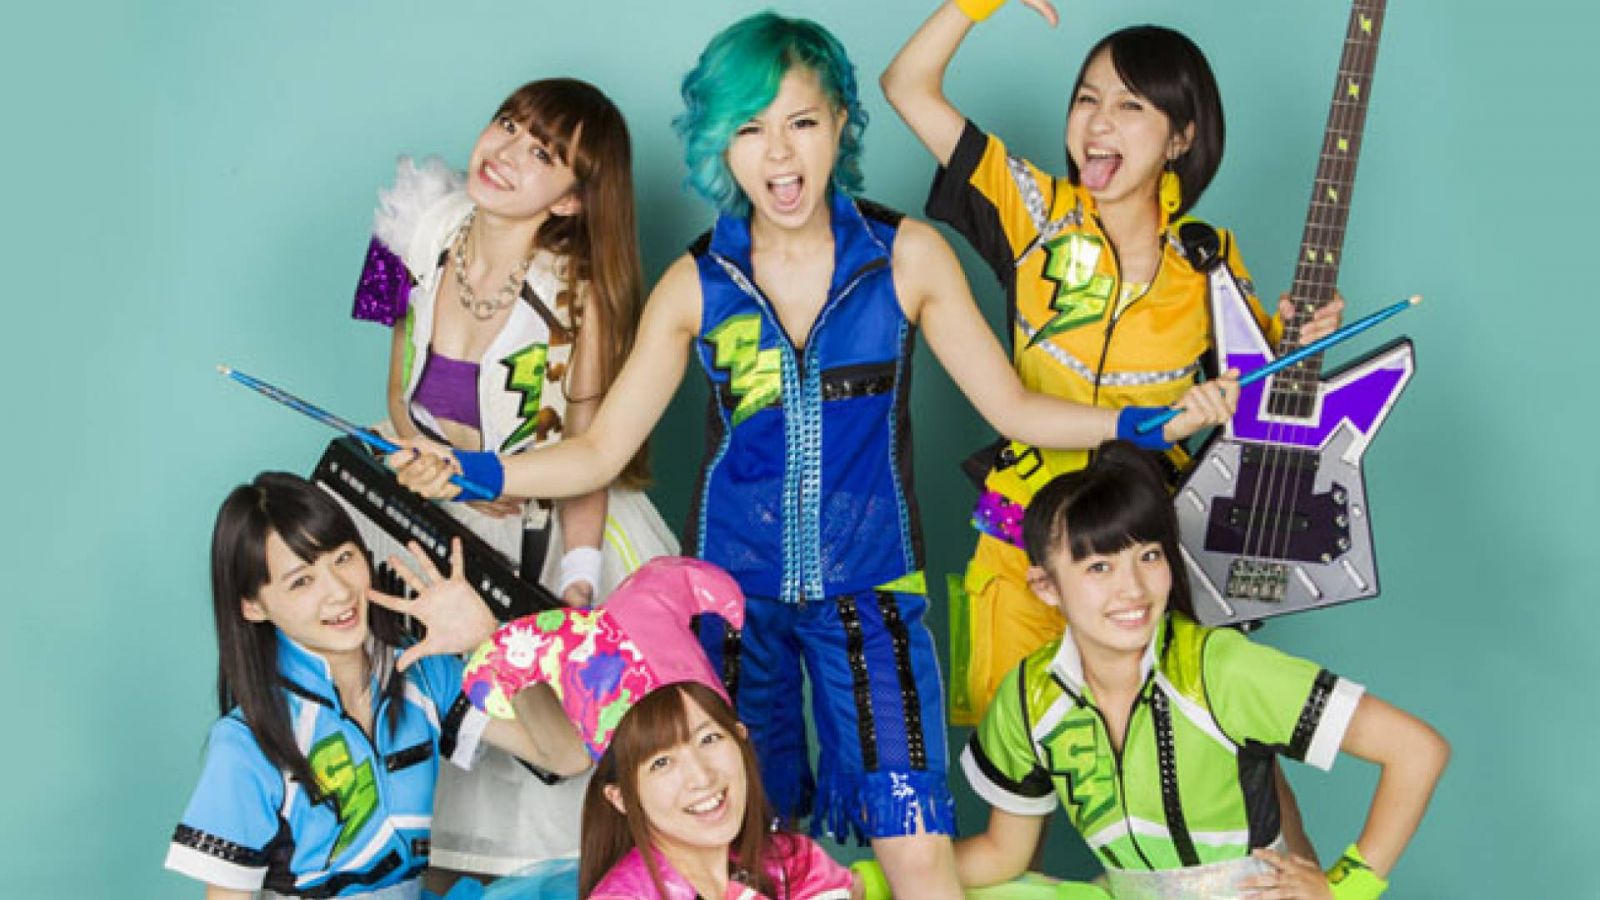 Nouveau single pour Gacharic Spin © Gacharic Spin